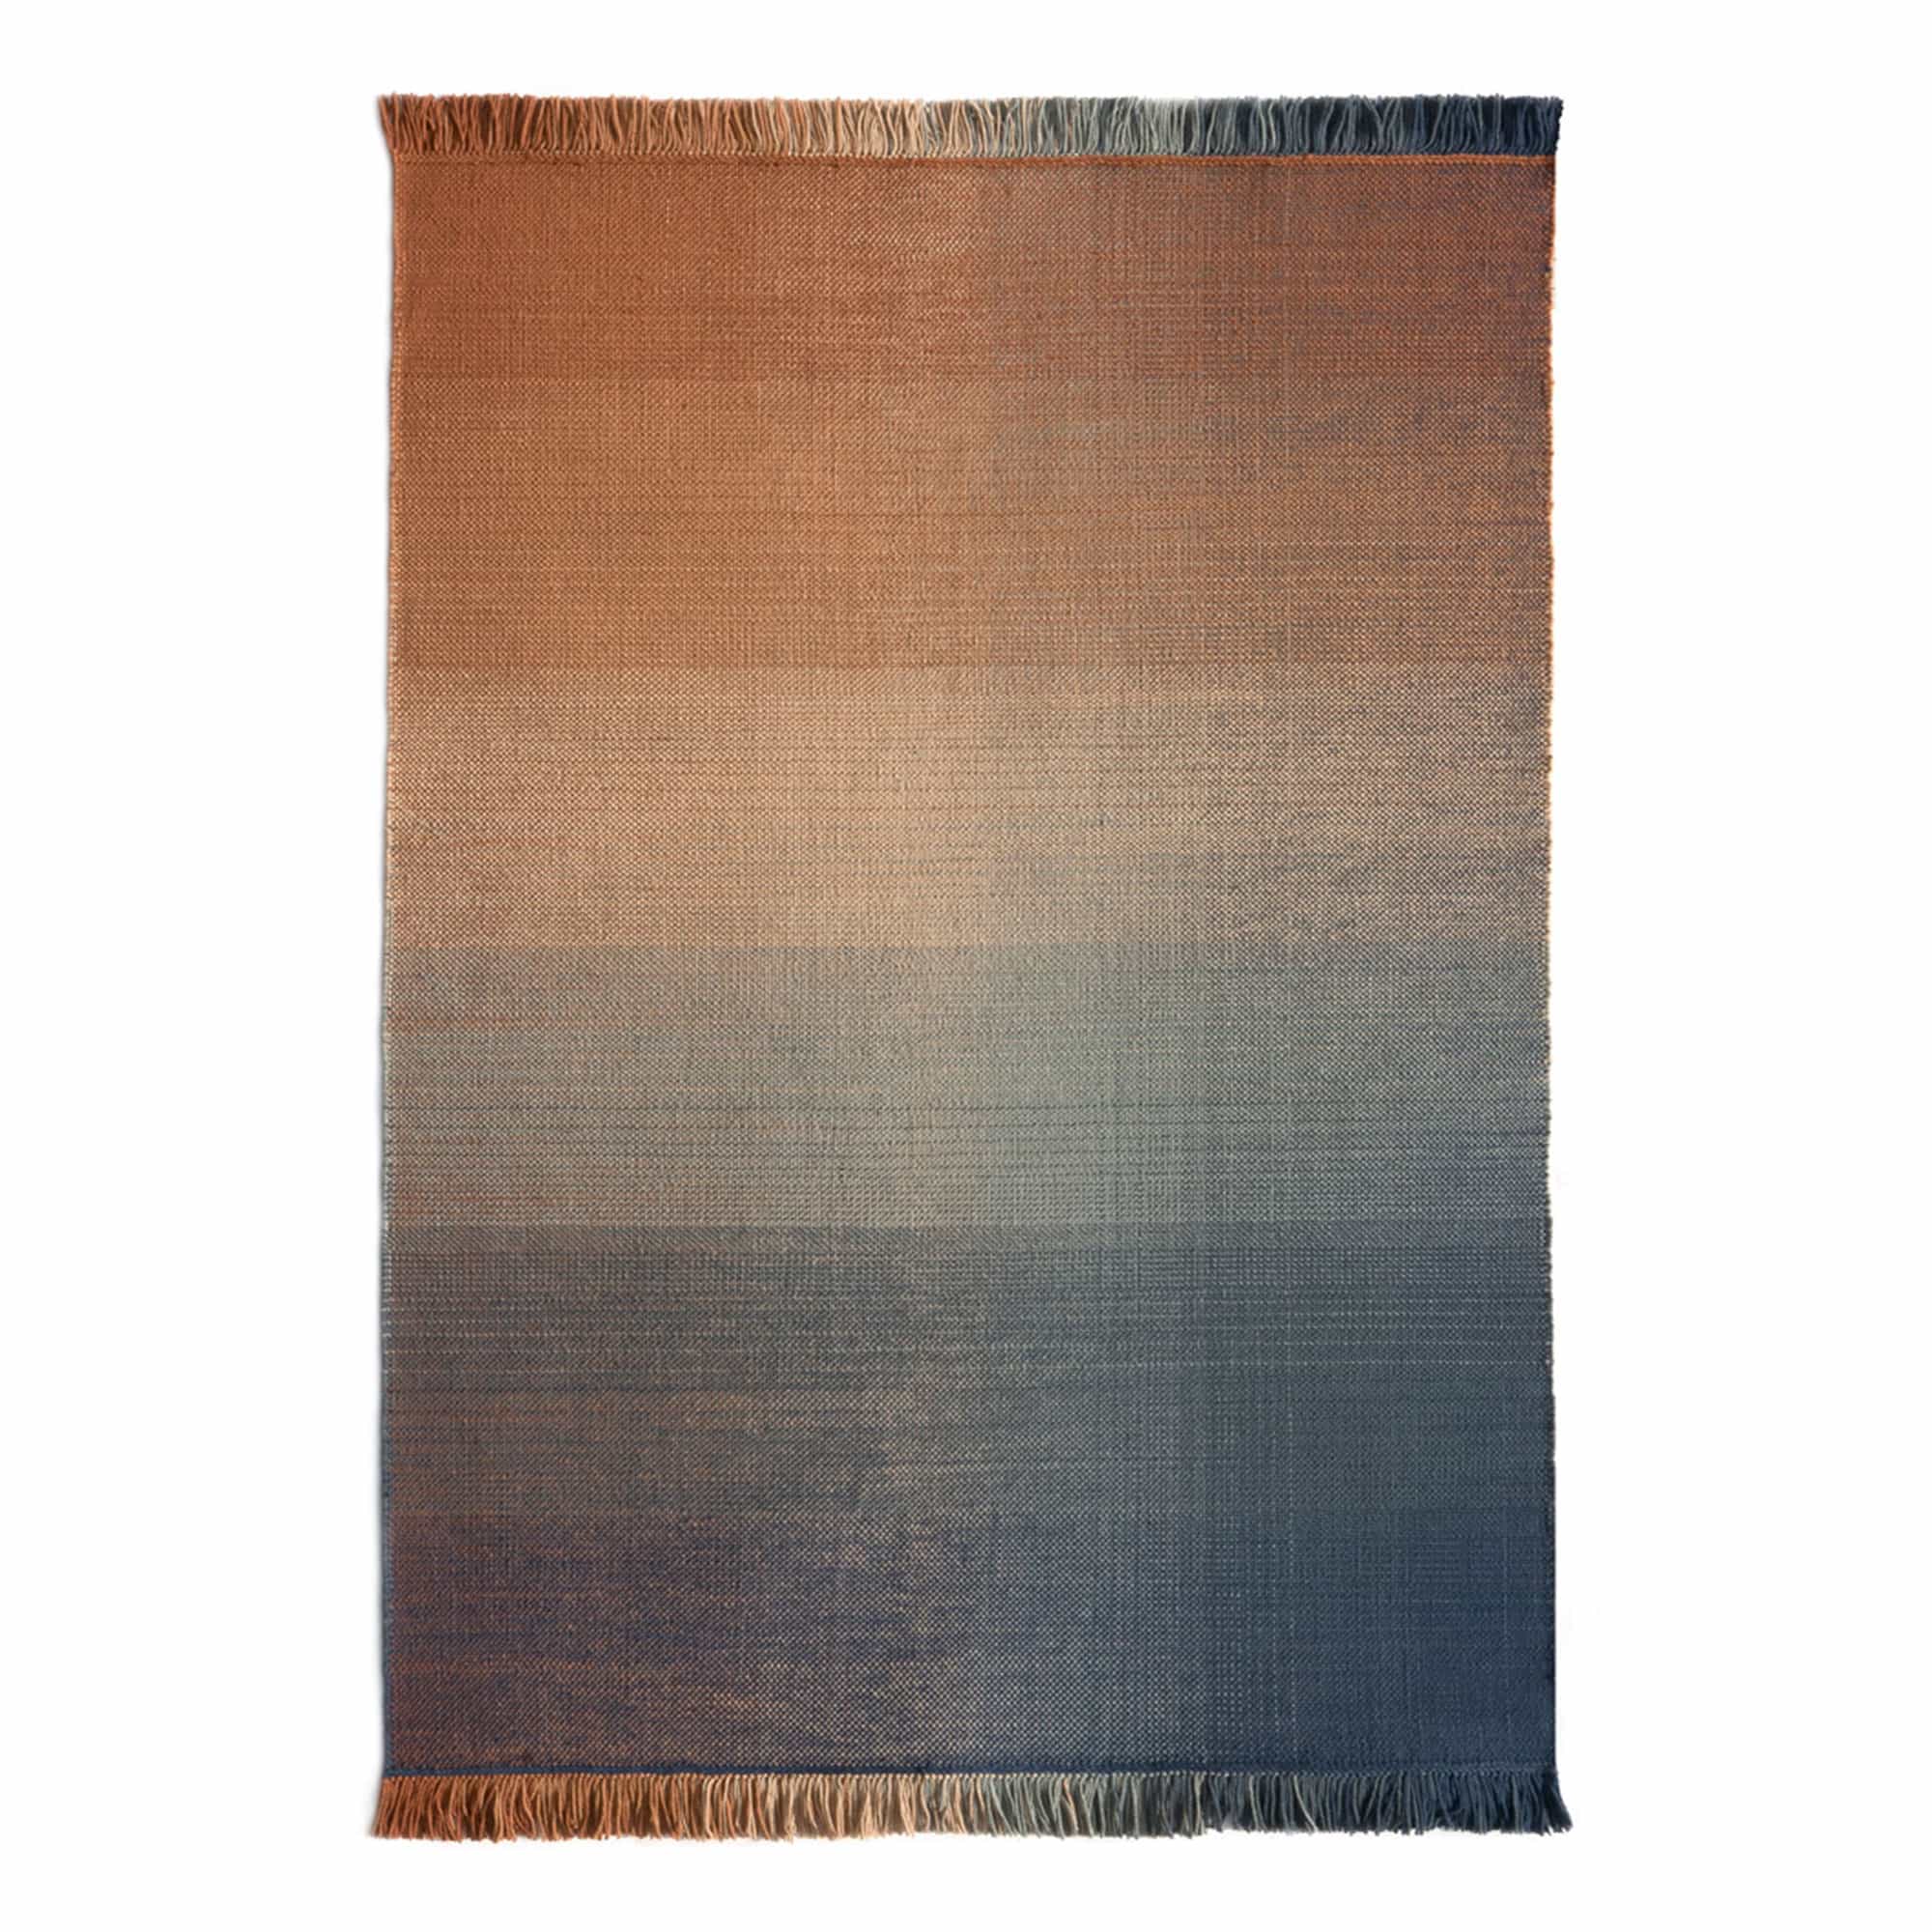 Shade Outdoor Palette 2 Rug